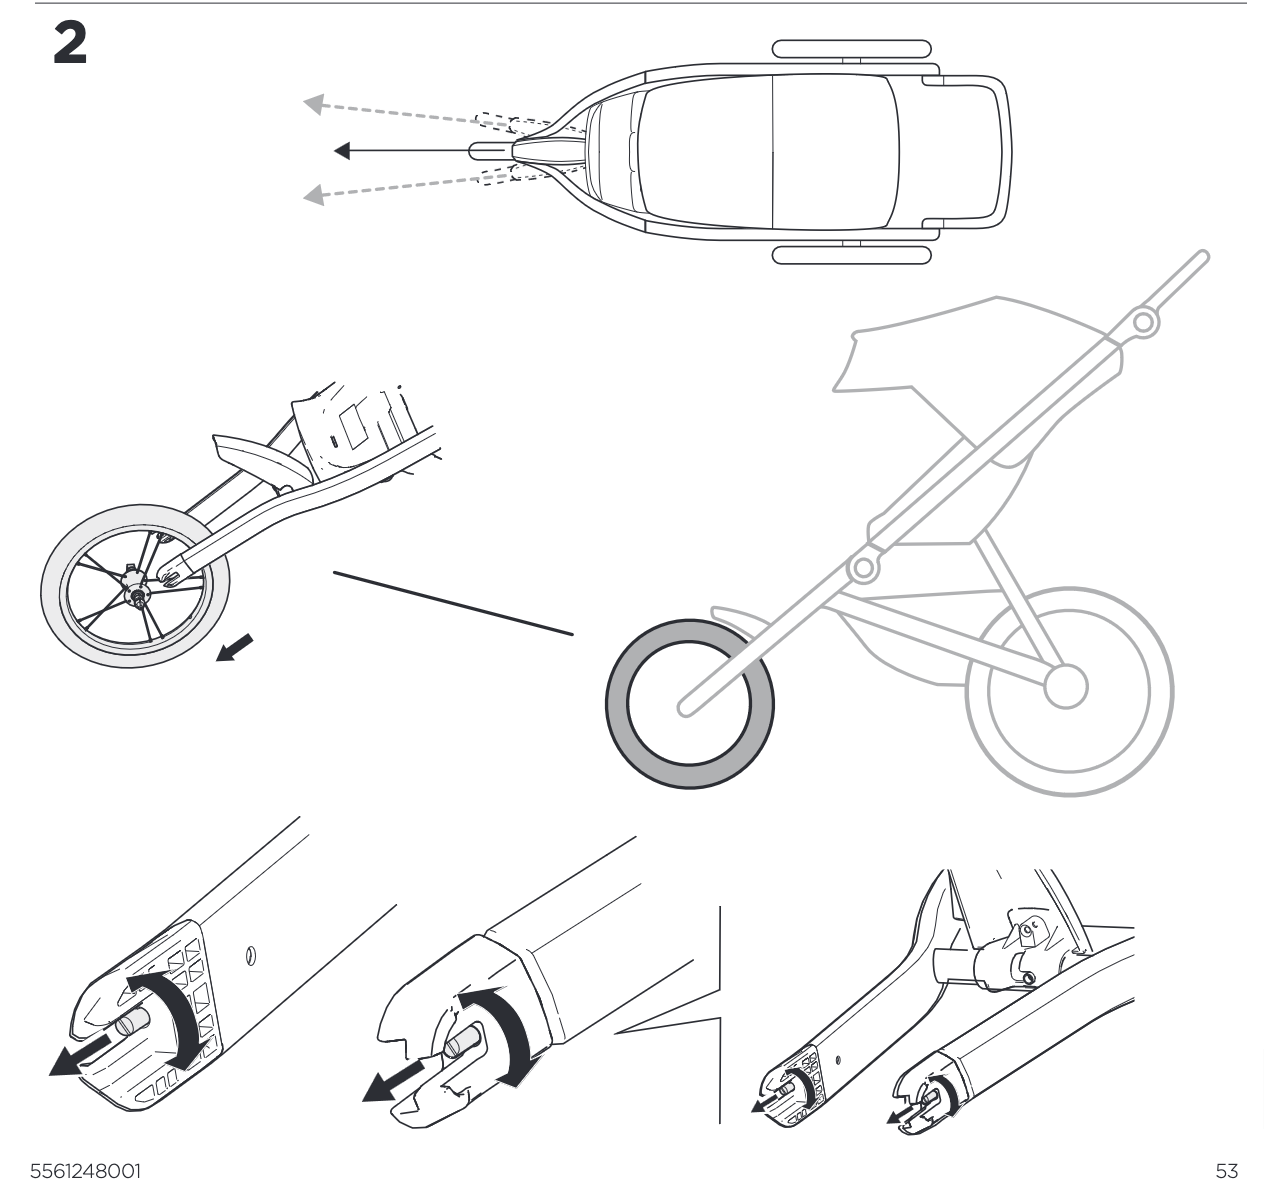 Thule Glide 2 adjustment instructions